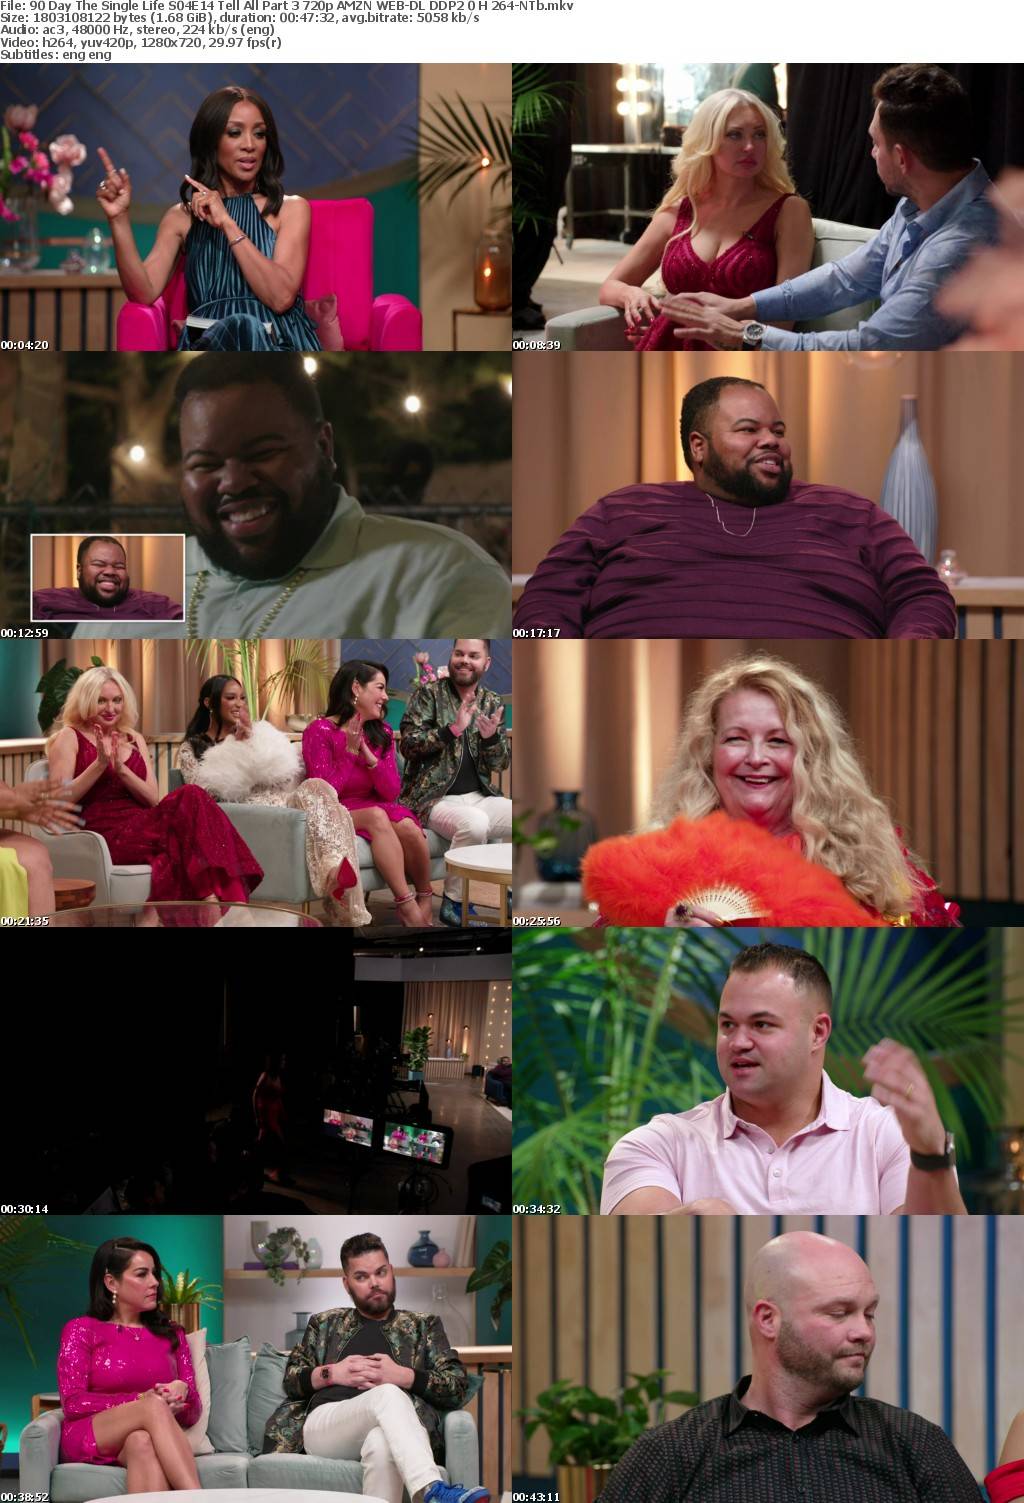 90 Day The Single Life S04E14 Tell All Part 3 720p AMZN WEB-DL DDP2 0 H 264-NTb